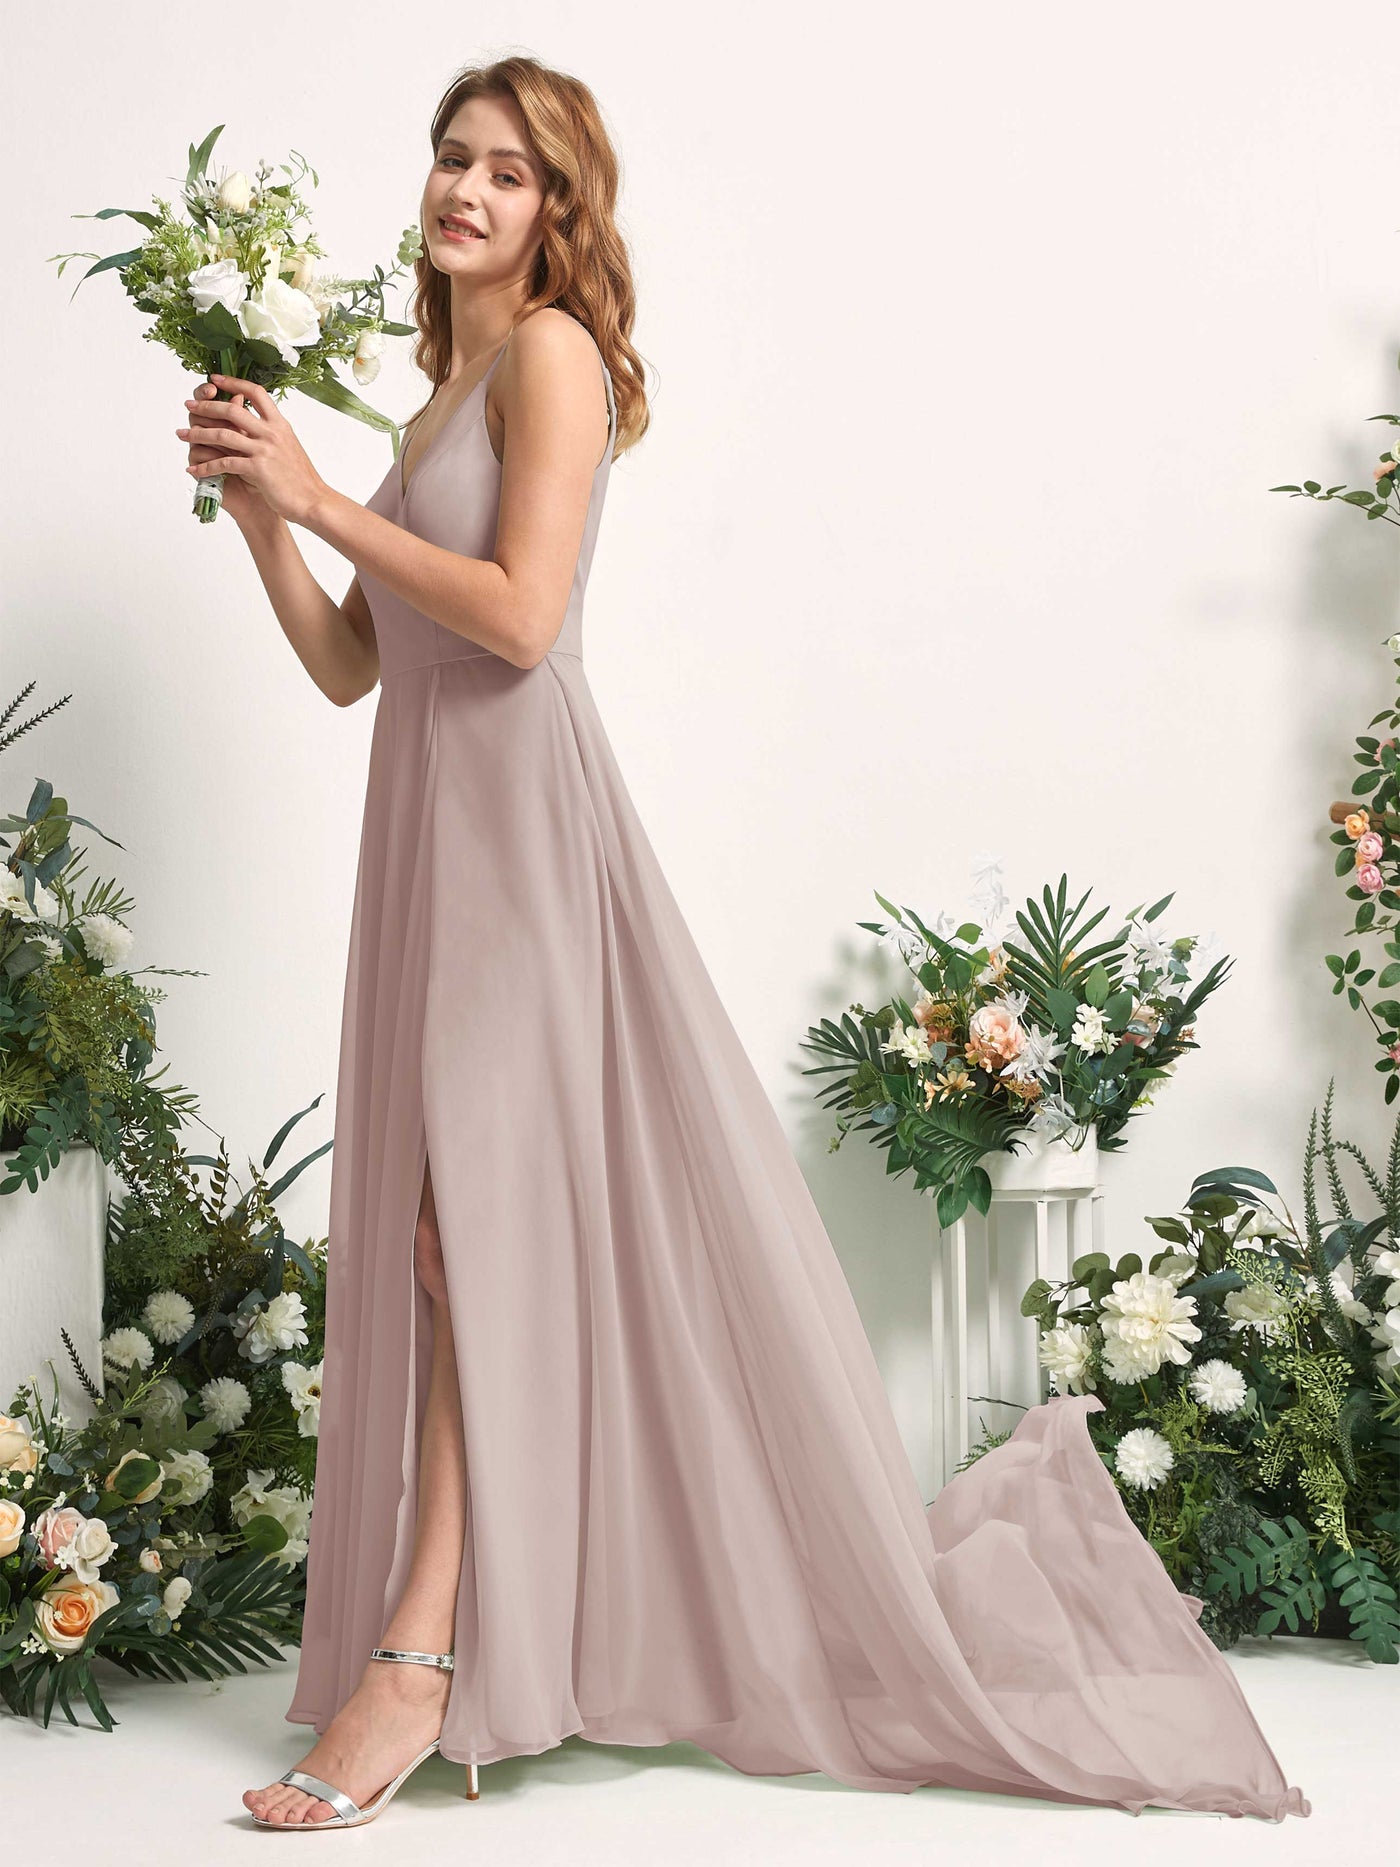 Bridesmaid Dress A-line Chiffon Spaghetti-straps Full Length Sleeveless Wedding Party Dress - Taupe (81227724)#color_taupe